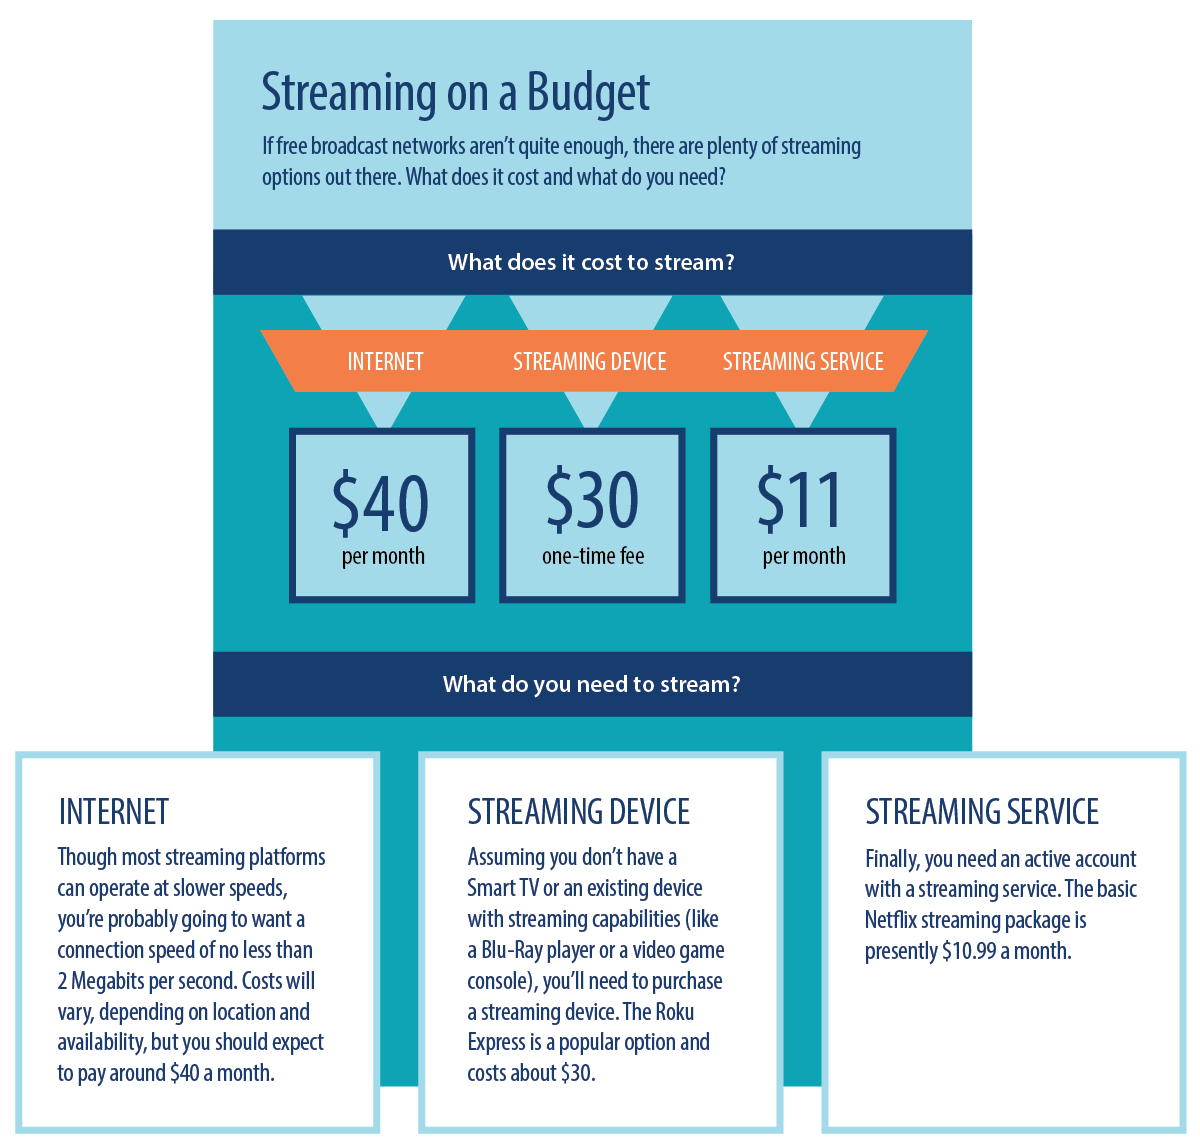 The cost of streaming television